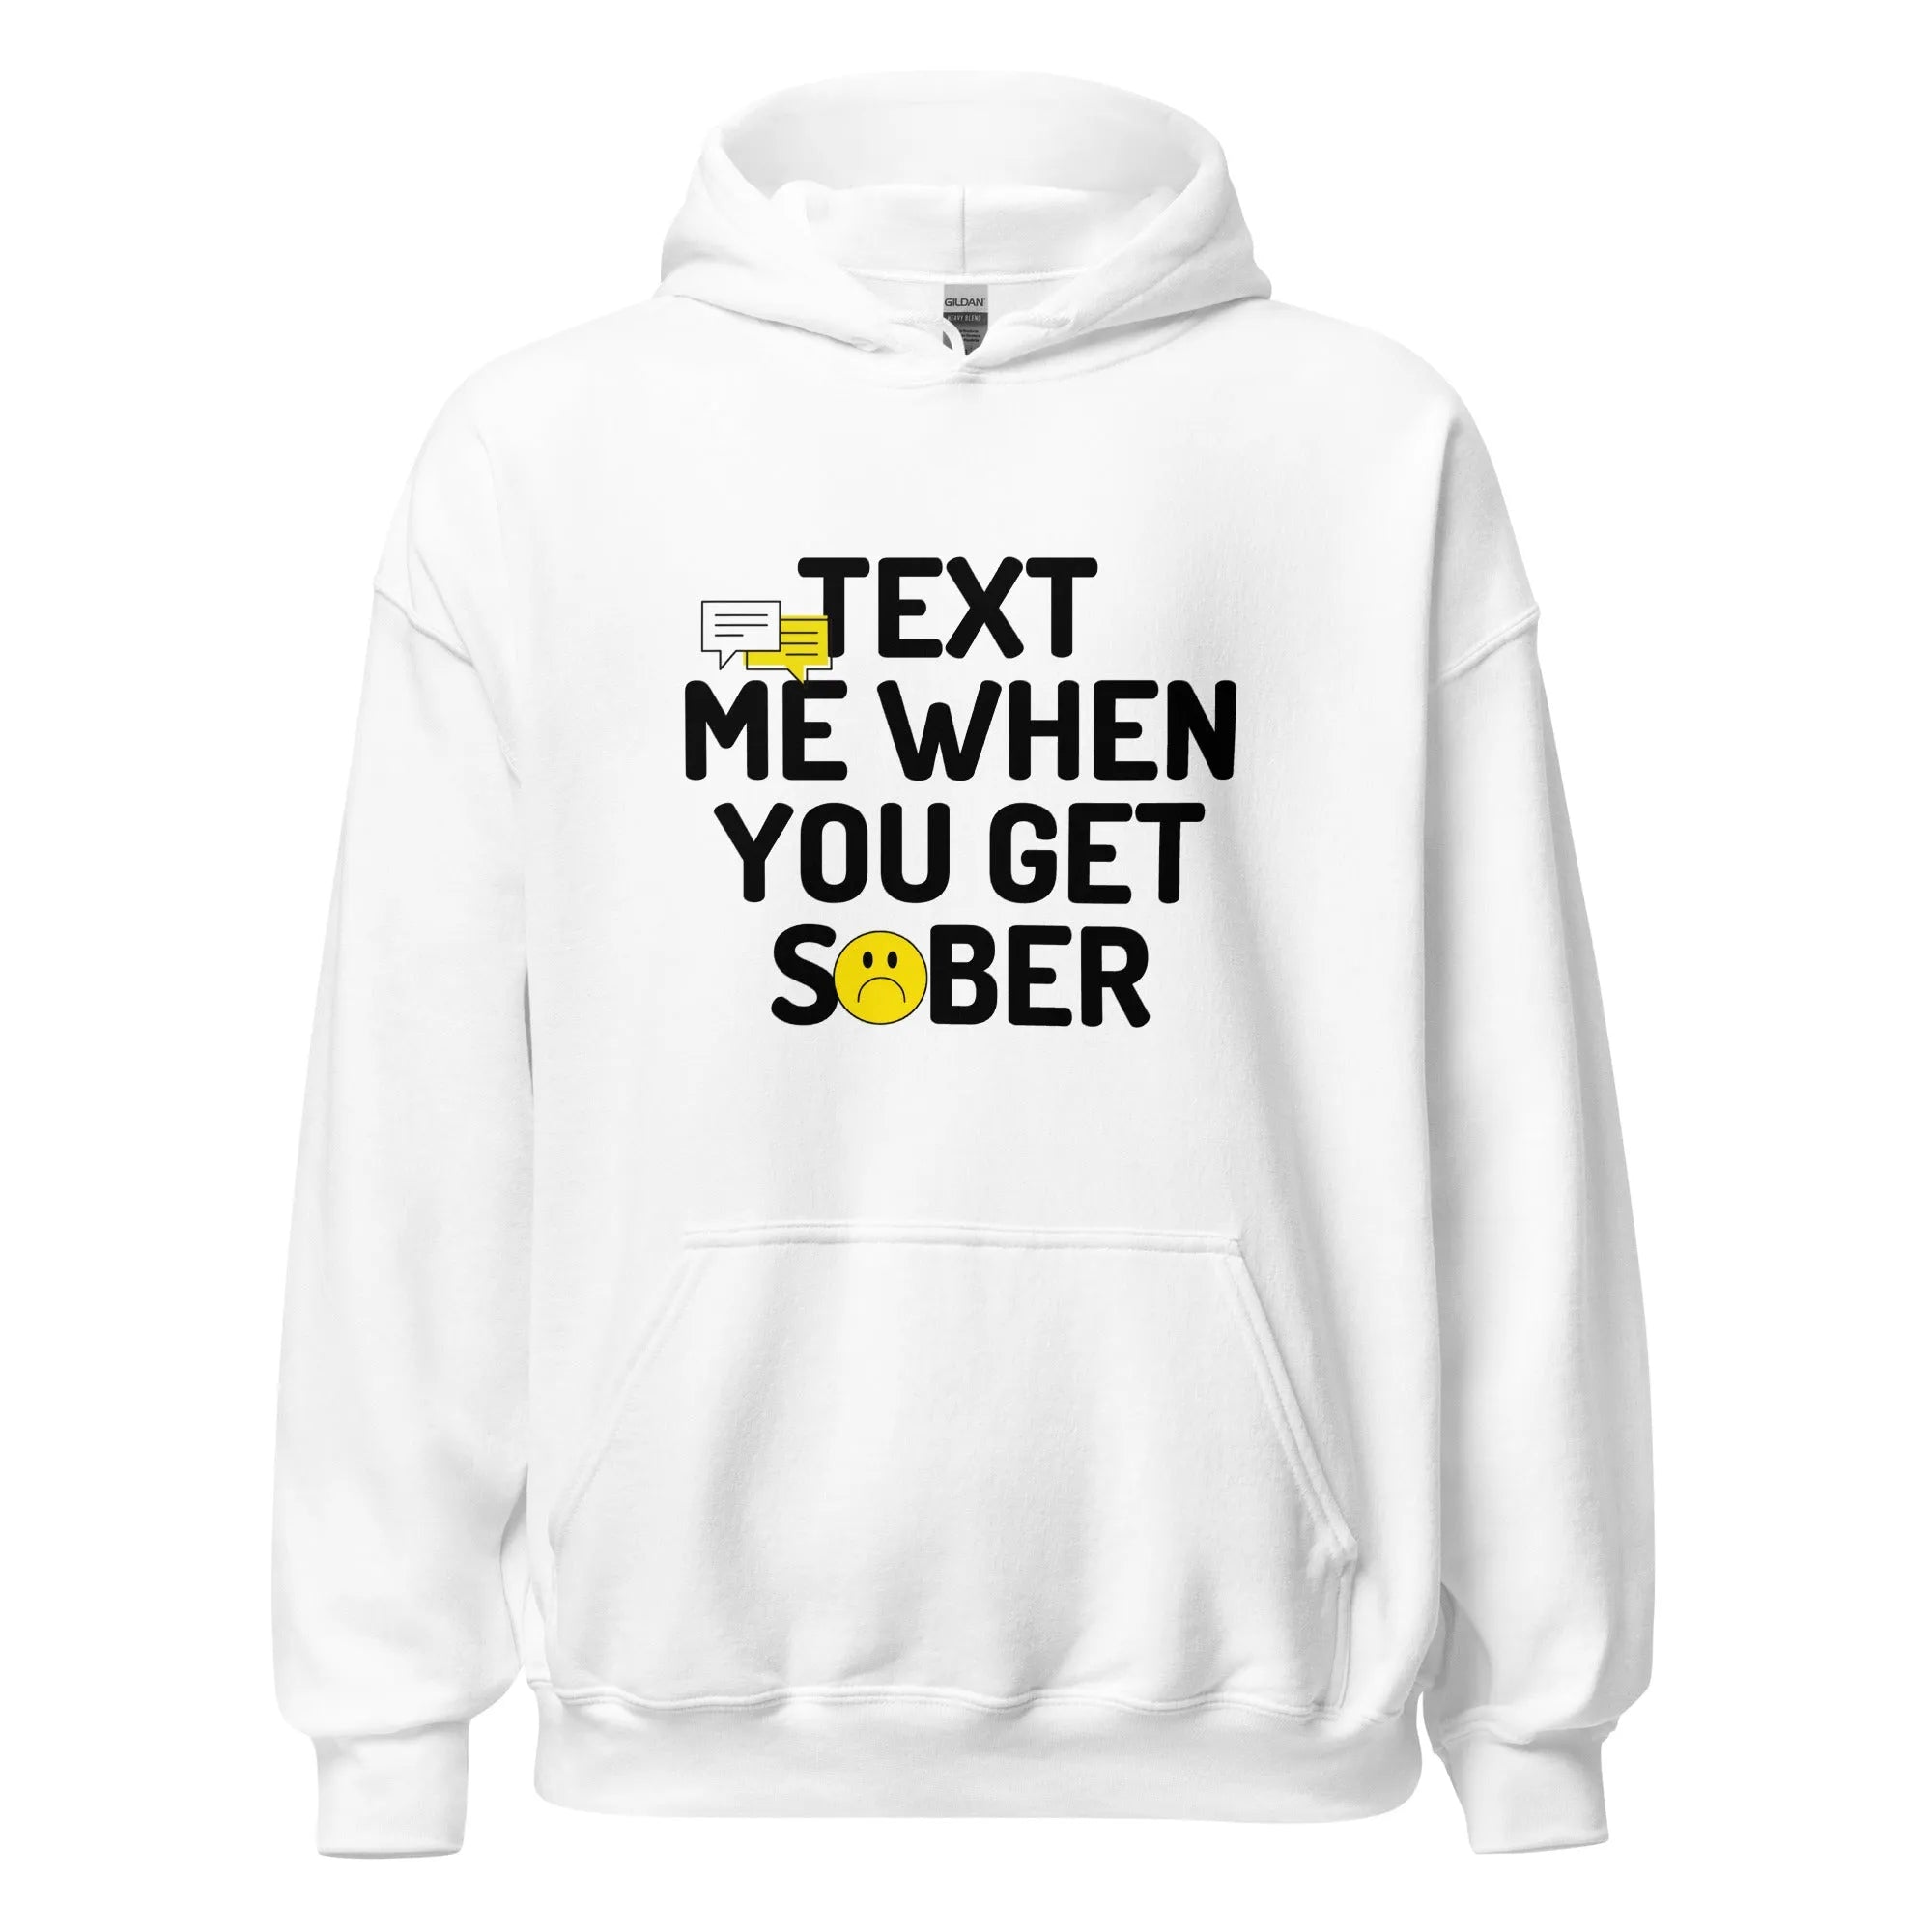 Text Me When You Get Sober! - Unisex Hoodie - Sobervation